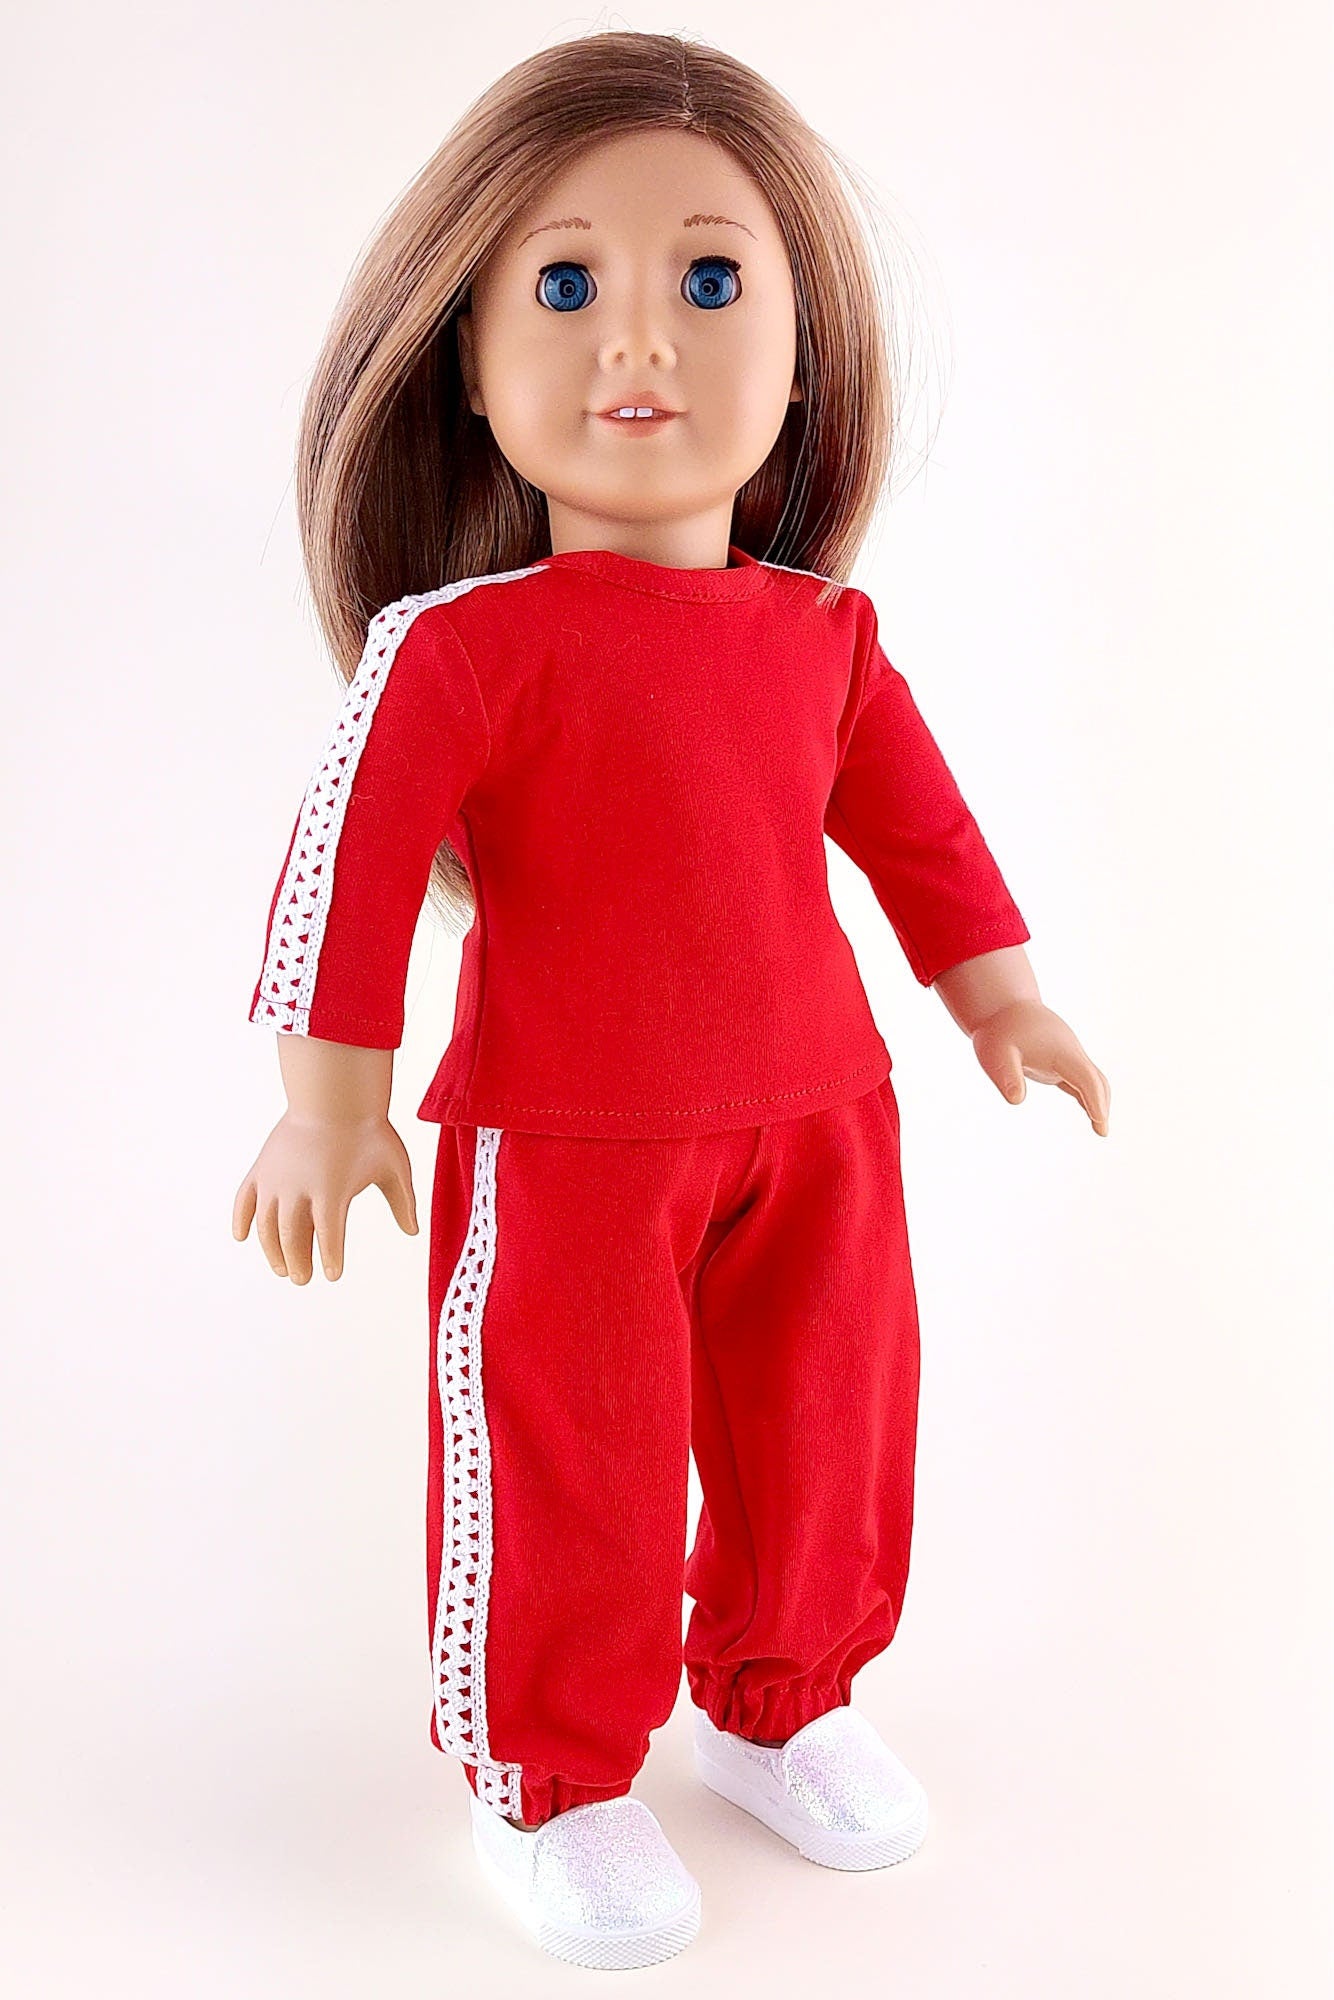 American Girl Doll Pajama - Red Sweatshirt and Pants Dolls - 18 Inch D – My  Kind Toys